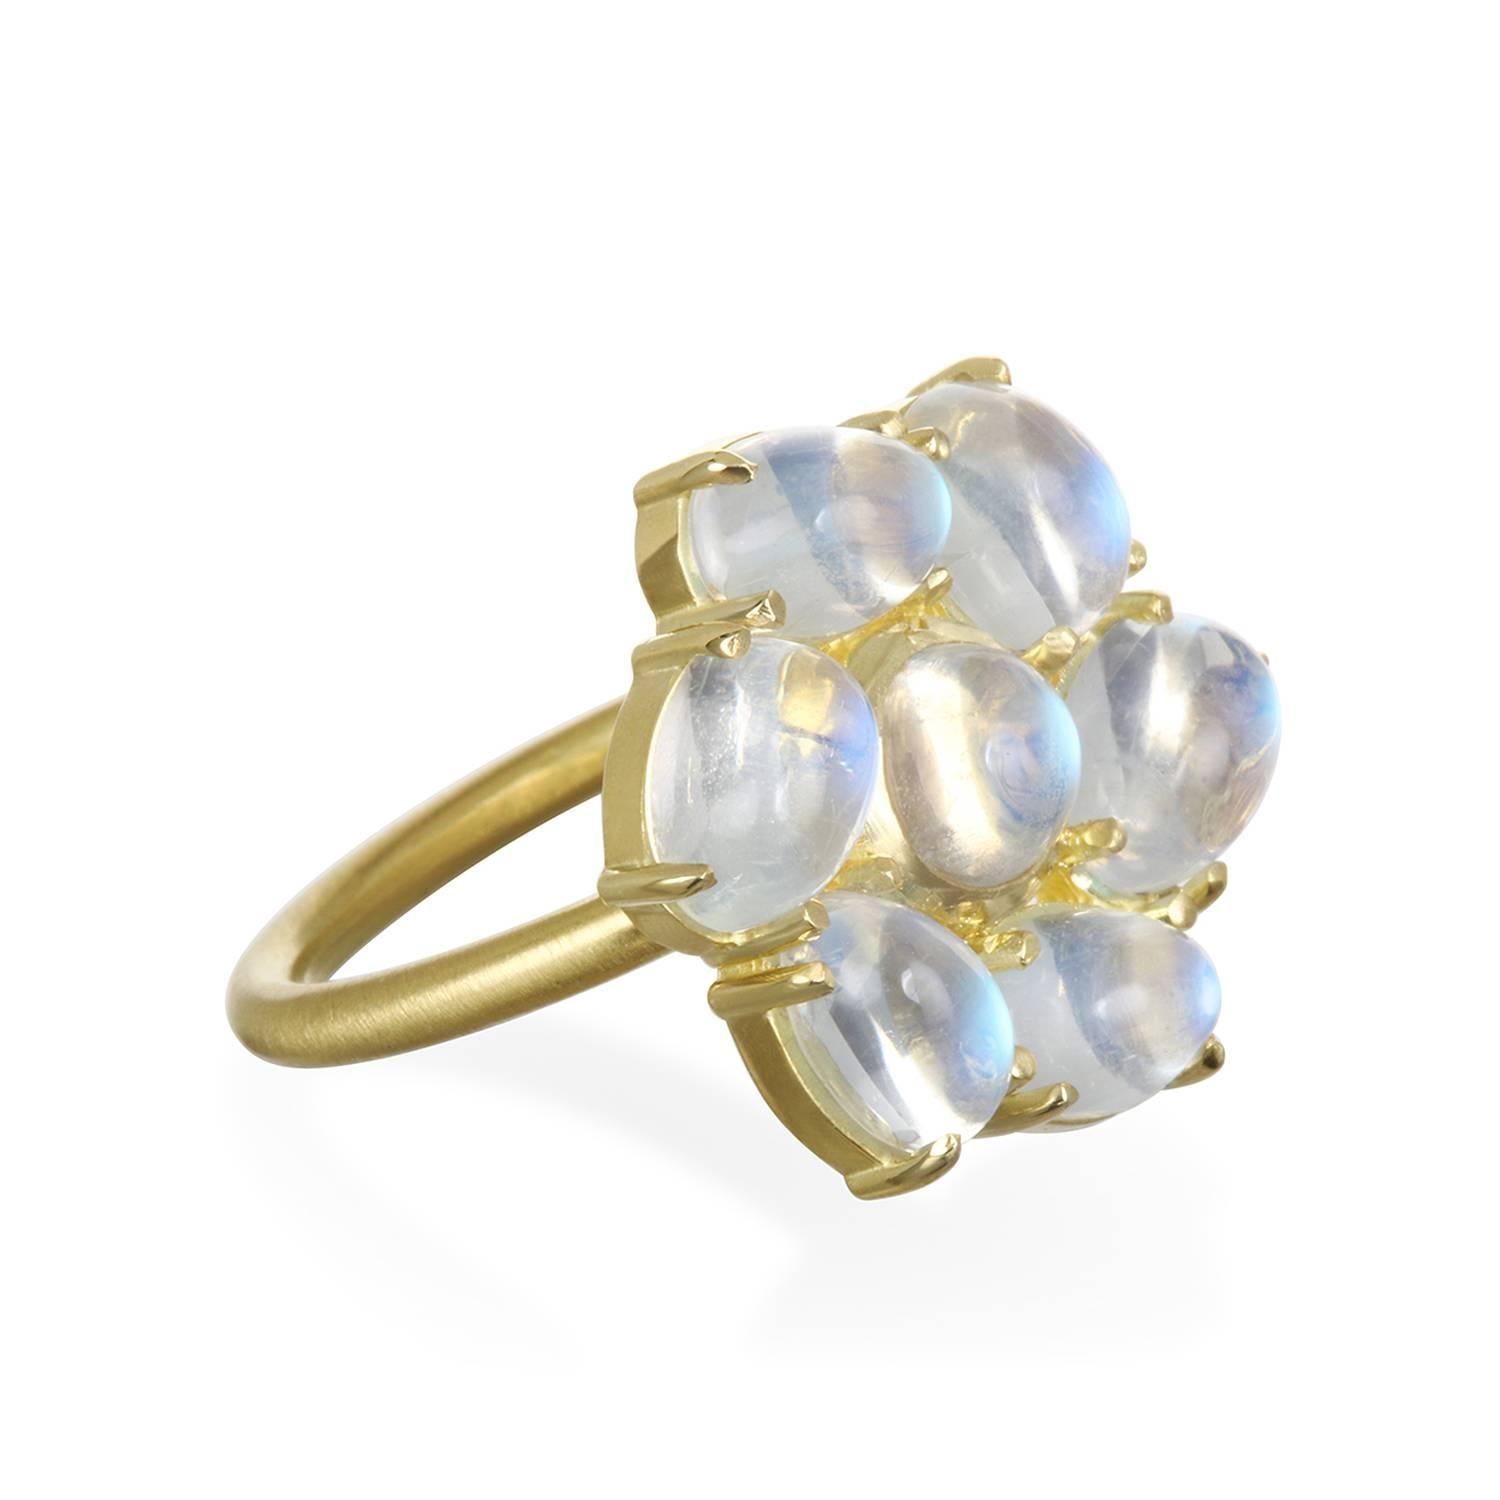 Take a walk on the glamorous side with this moonstone daisy ring.  Size, comfort, and beauty come together in the daisy ring that looks great worn on any finger.  Known for its adularescence, the inimitable blue flash from Ceylon moonstones adds to